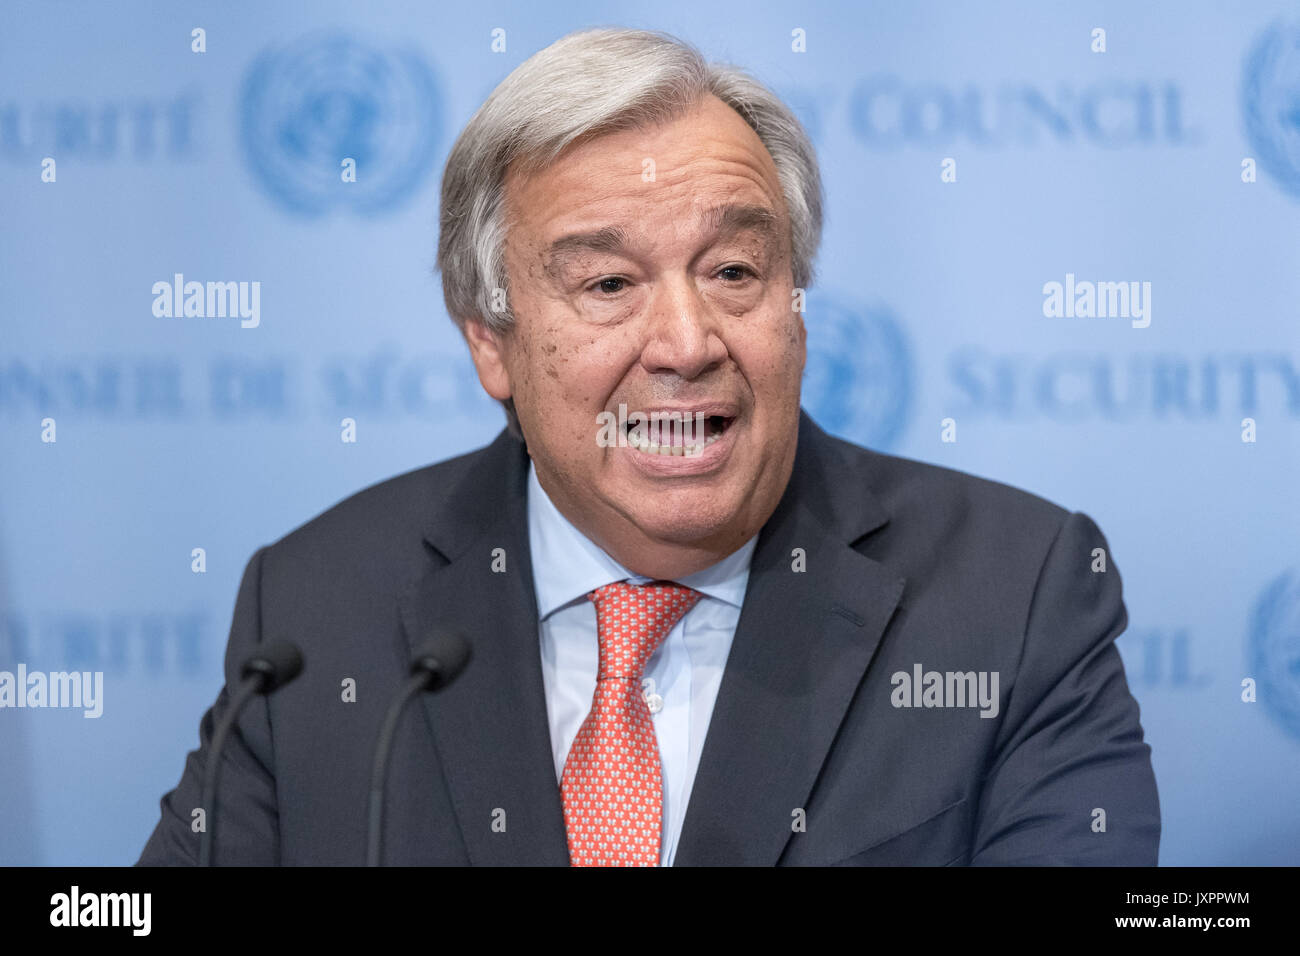 New York, United States. 16th Aug, 2017. United Nations Secretary-General Antonio Guterres spoke to the press at the Security Council stakeout at UN Headquarters delivering a brief prepared statement regarding the ongoing security issues posed by North Korea's nuclear weapons program. Following his prepared remarks, the Secretary-General responded to questions regarding the political crisis in Venezuela and U.S. President Donald Trump's stance regarding the rise of white nationalism. Credit: Albin Lohr-Jones/Pacific Press/Alamy Live News Stock Photo